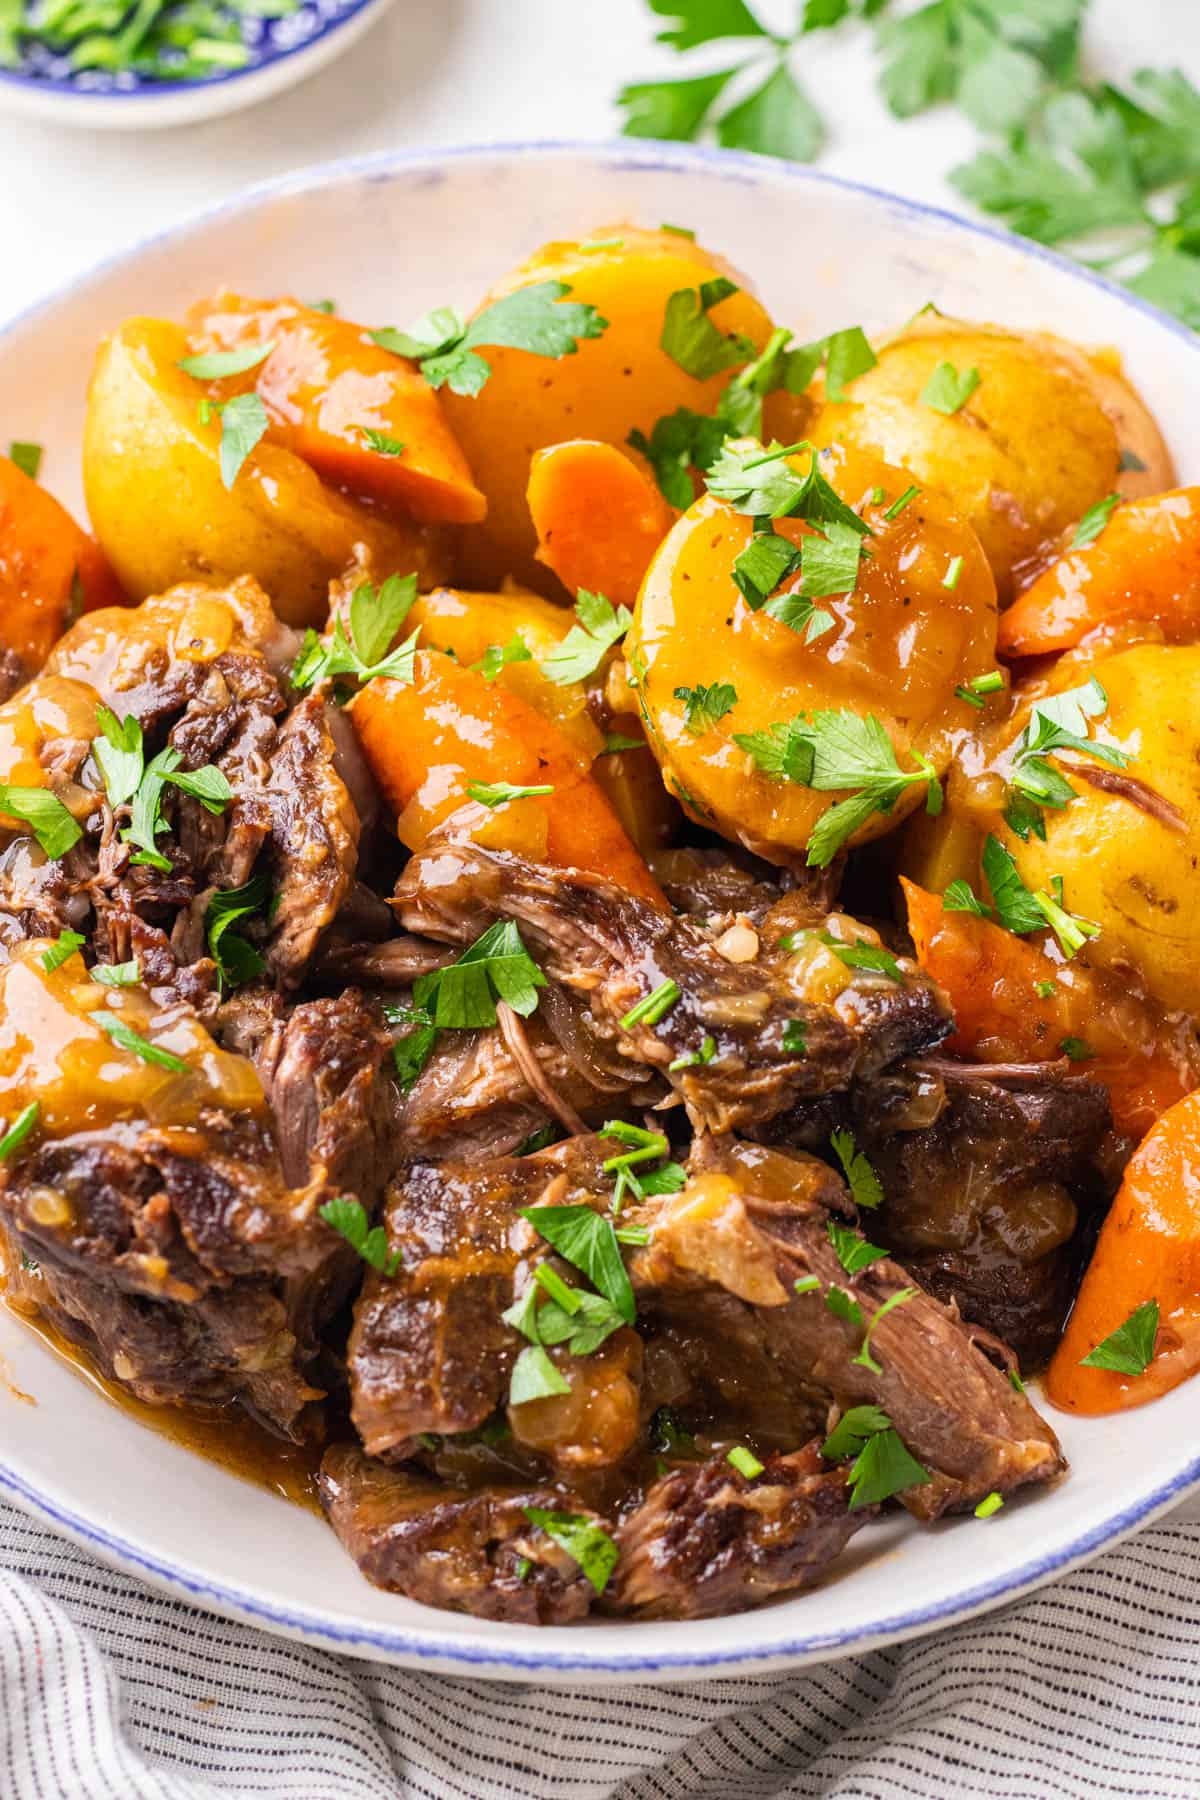 Pot roast with carrots and potatoes on a plate.